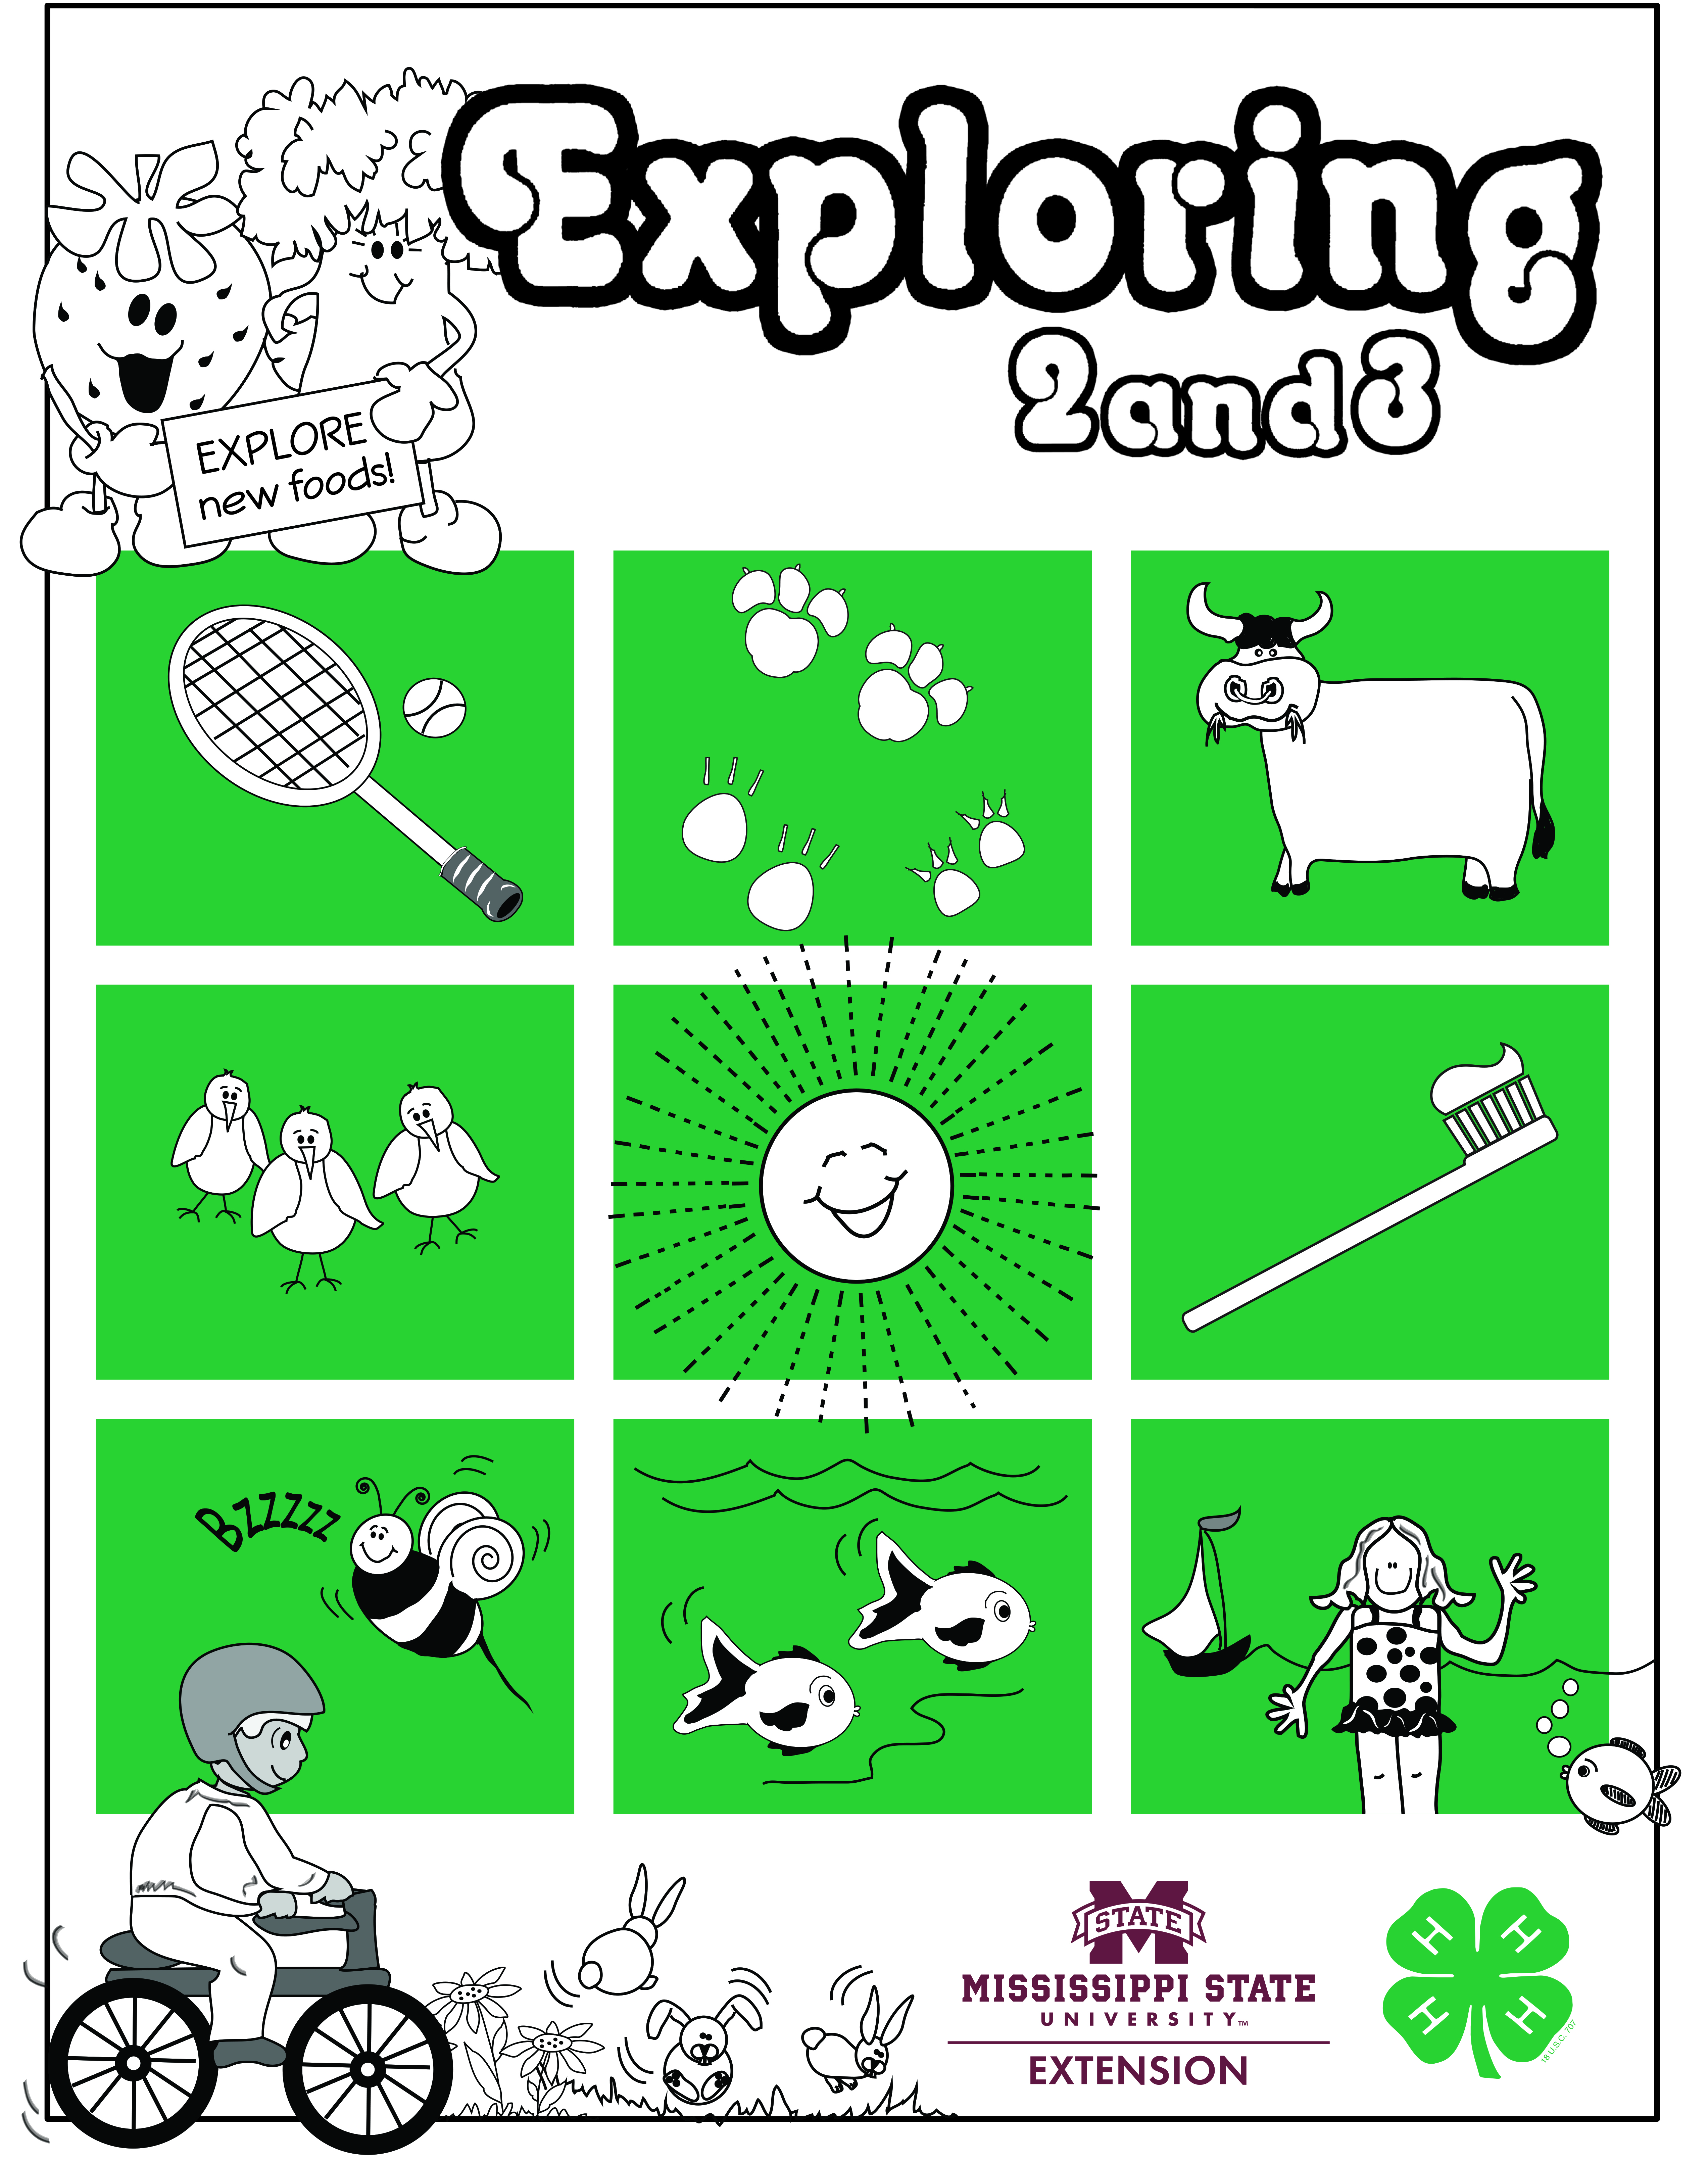 The cover of Exploring 2 and 3 has drawings of fruits and veggies, a cow, a tennis racket and ball, animal footprints, birds, the sun, a toothbrush, a bee, fish, a person at the ocean, and a person riding a bike.